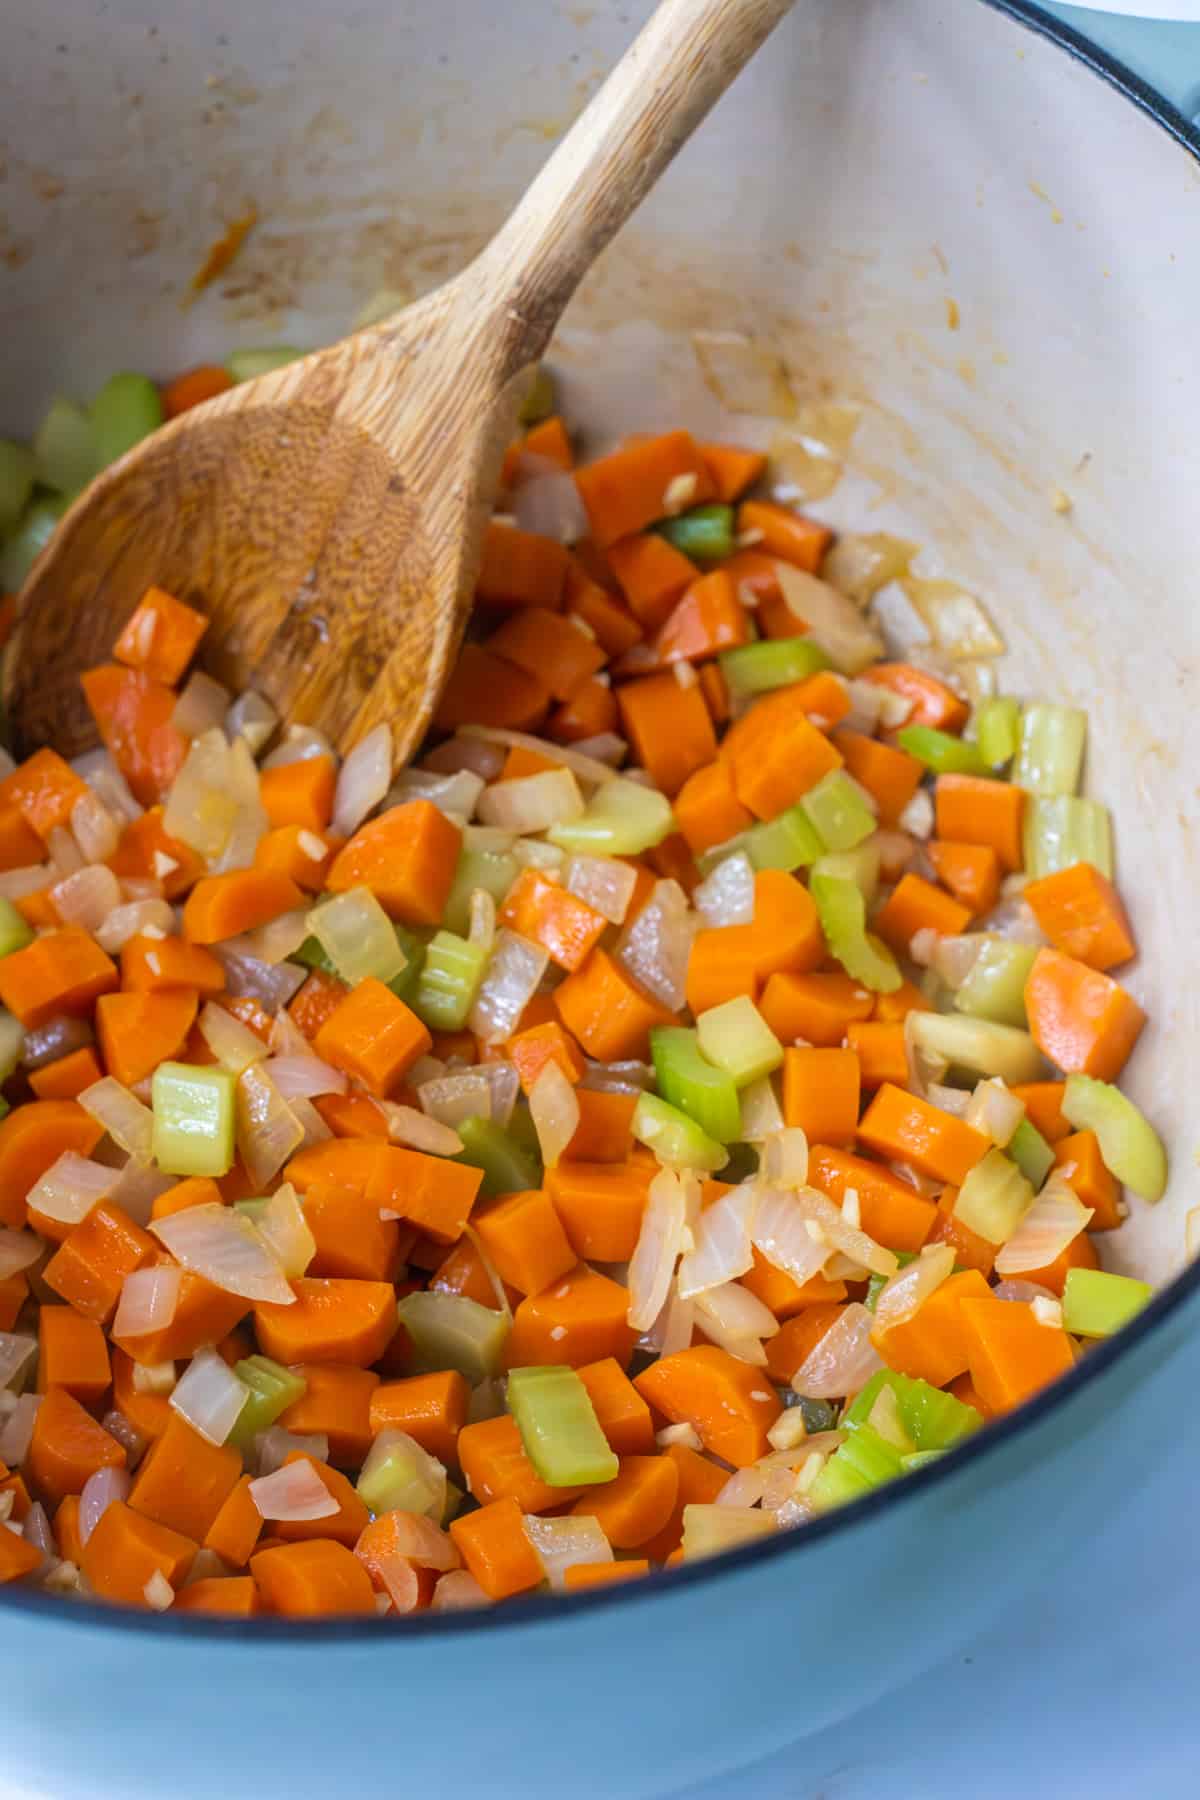 Diced carrots, onion, celery, and garlic in a pot with a wood spoon.